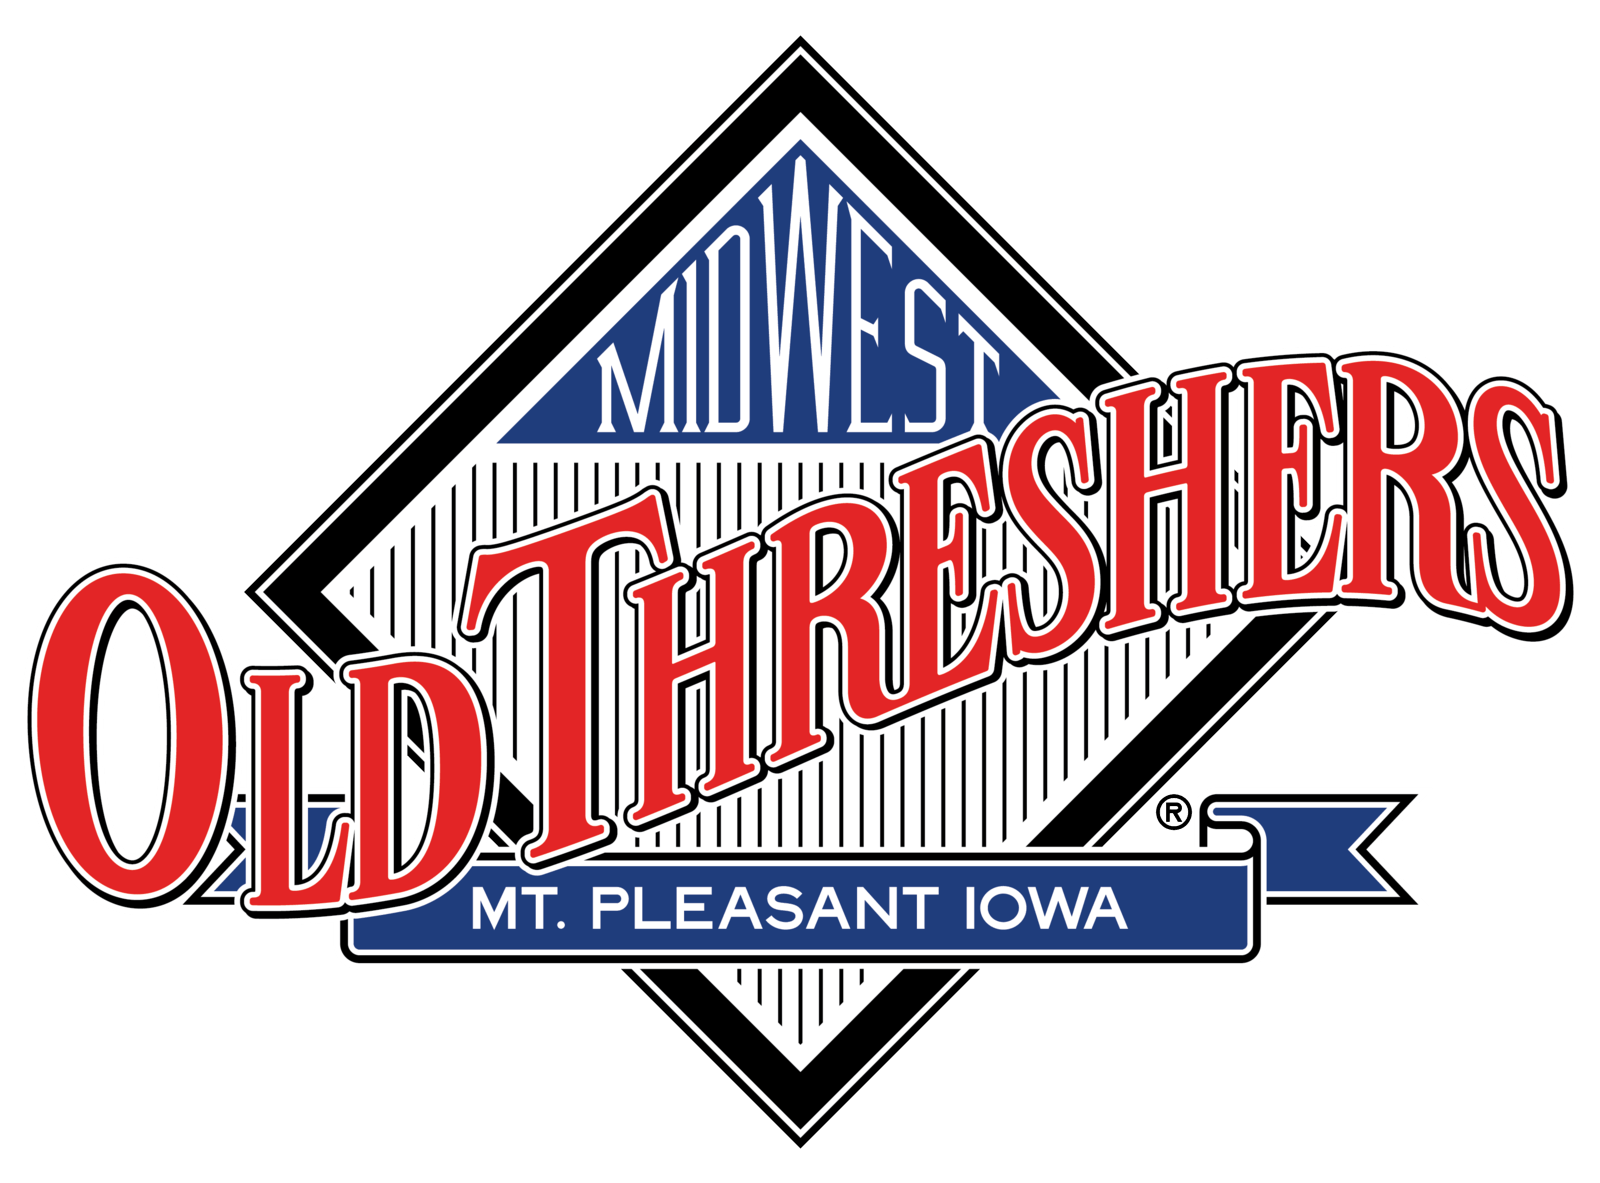 Old Thrasher Logo - Midwest Old Settlers & Threshers